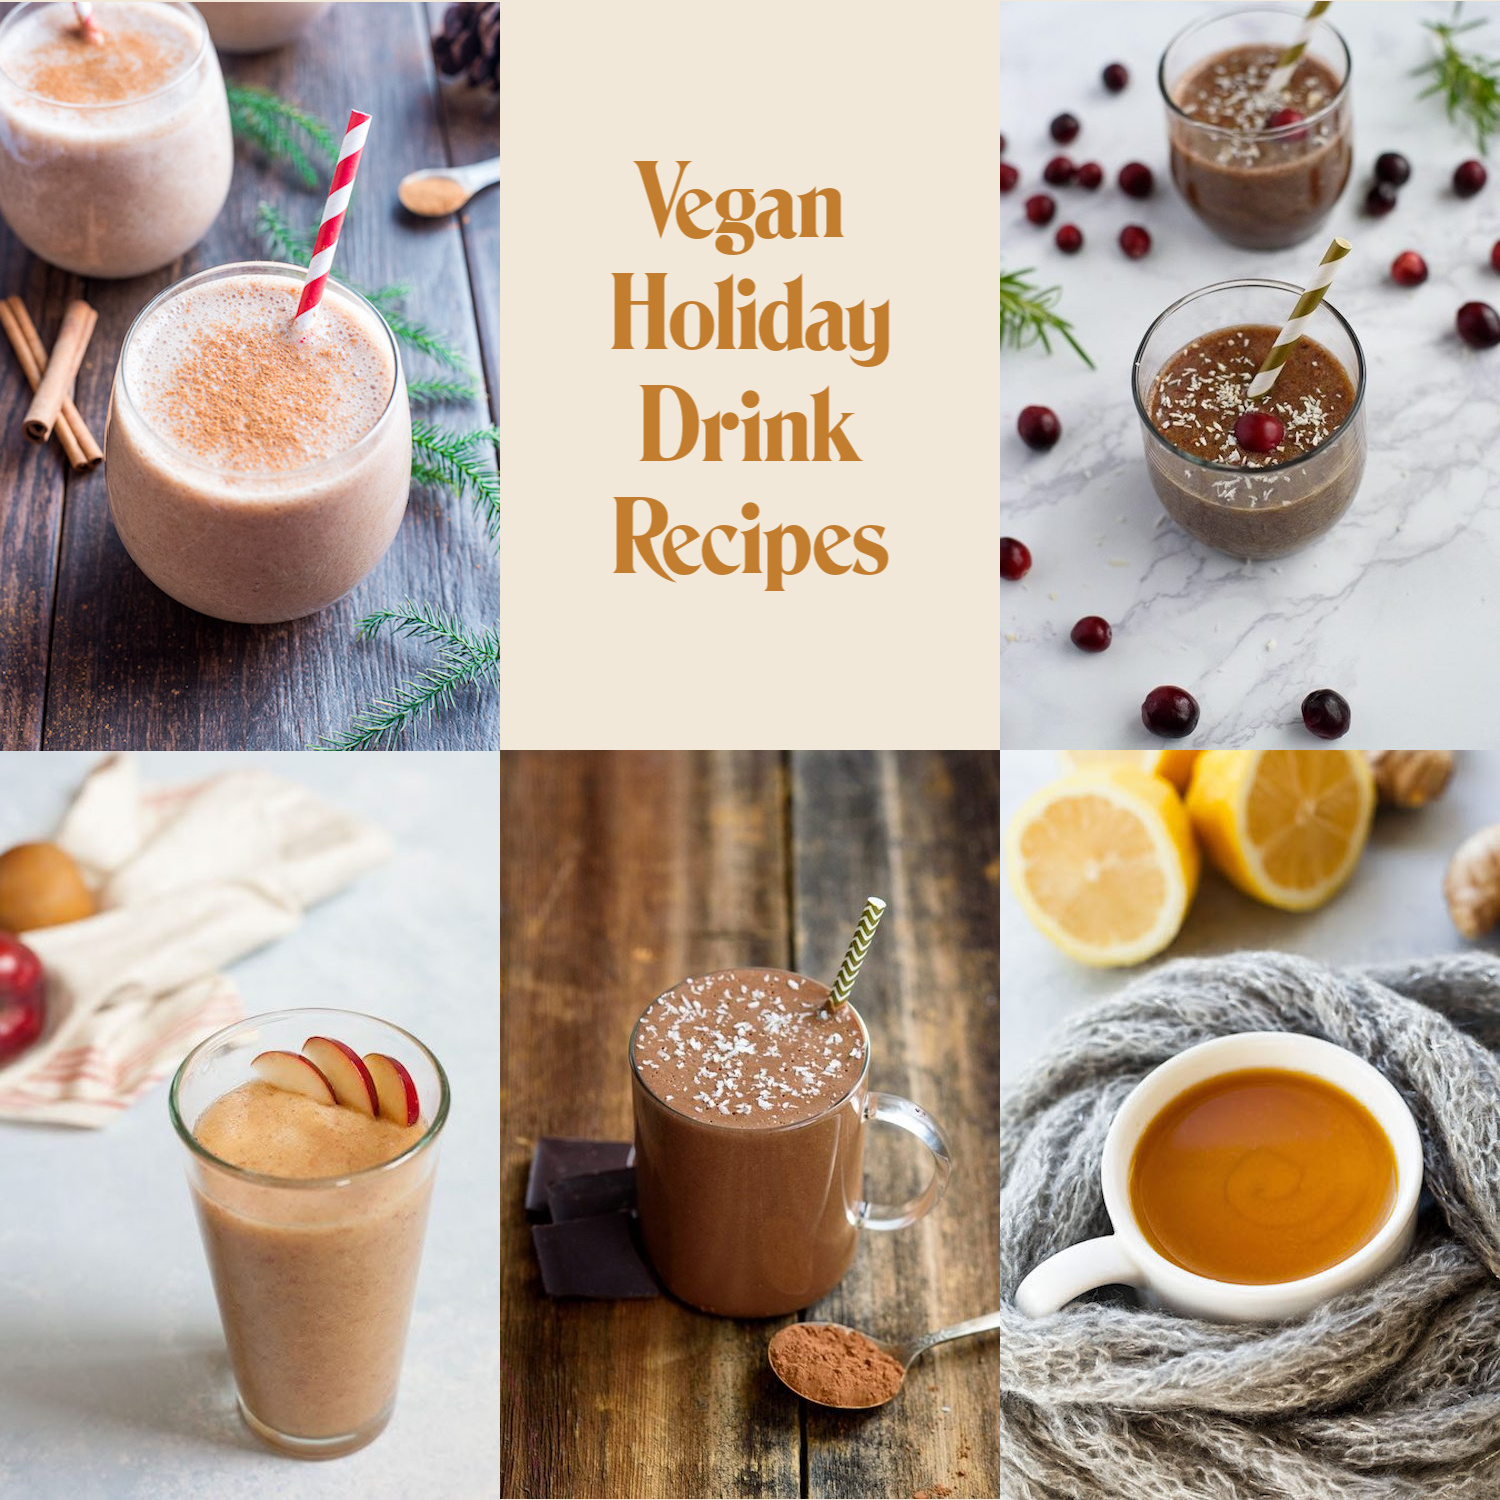 10 Non-Alcoholic + Vegan Holiday Drink Recipes Perfect for Fall & Winter